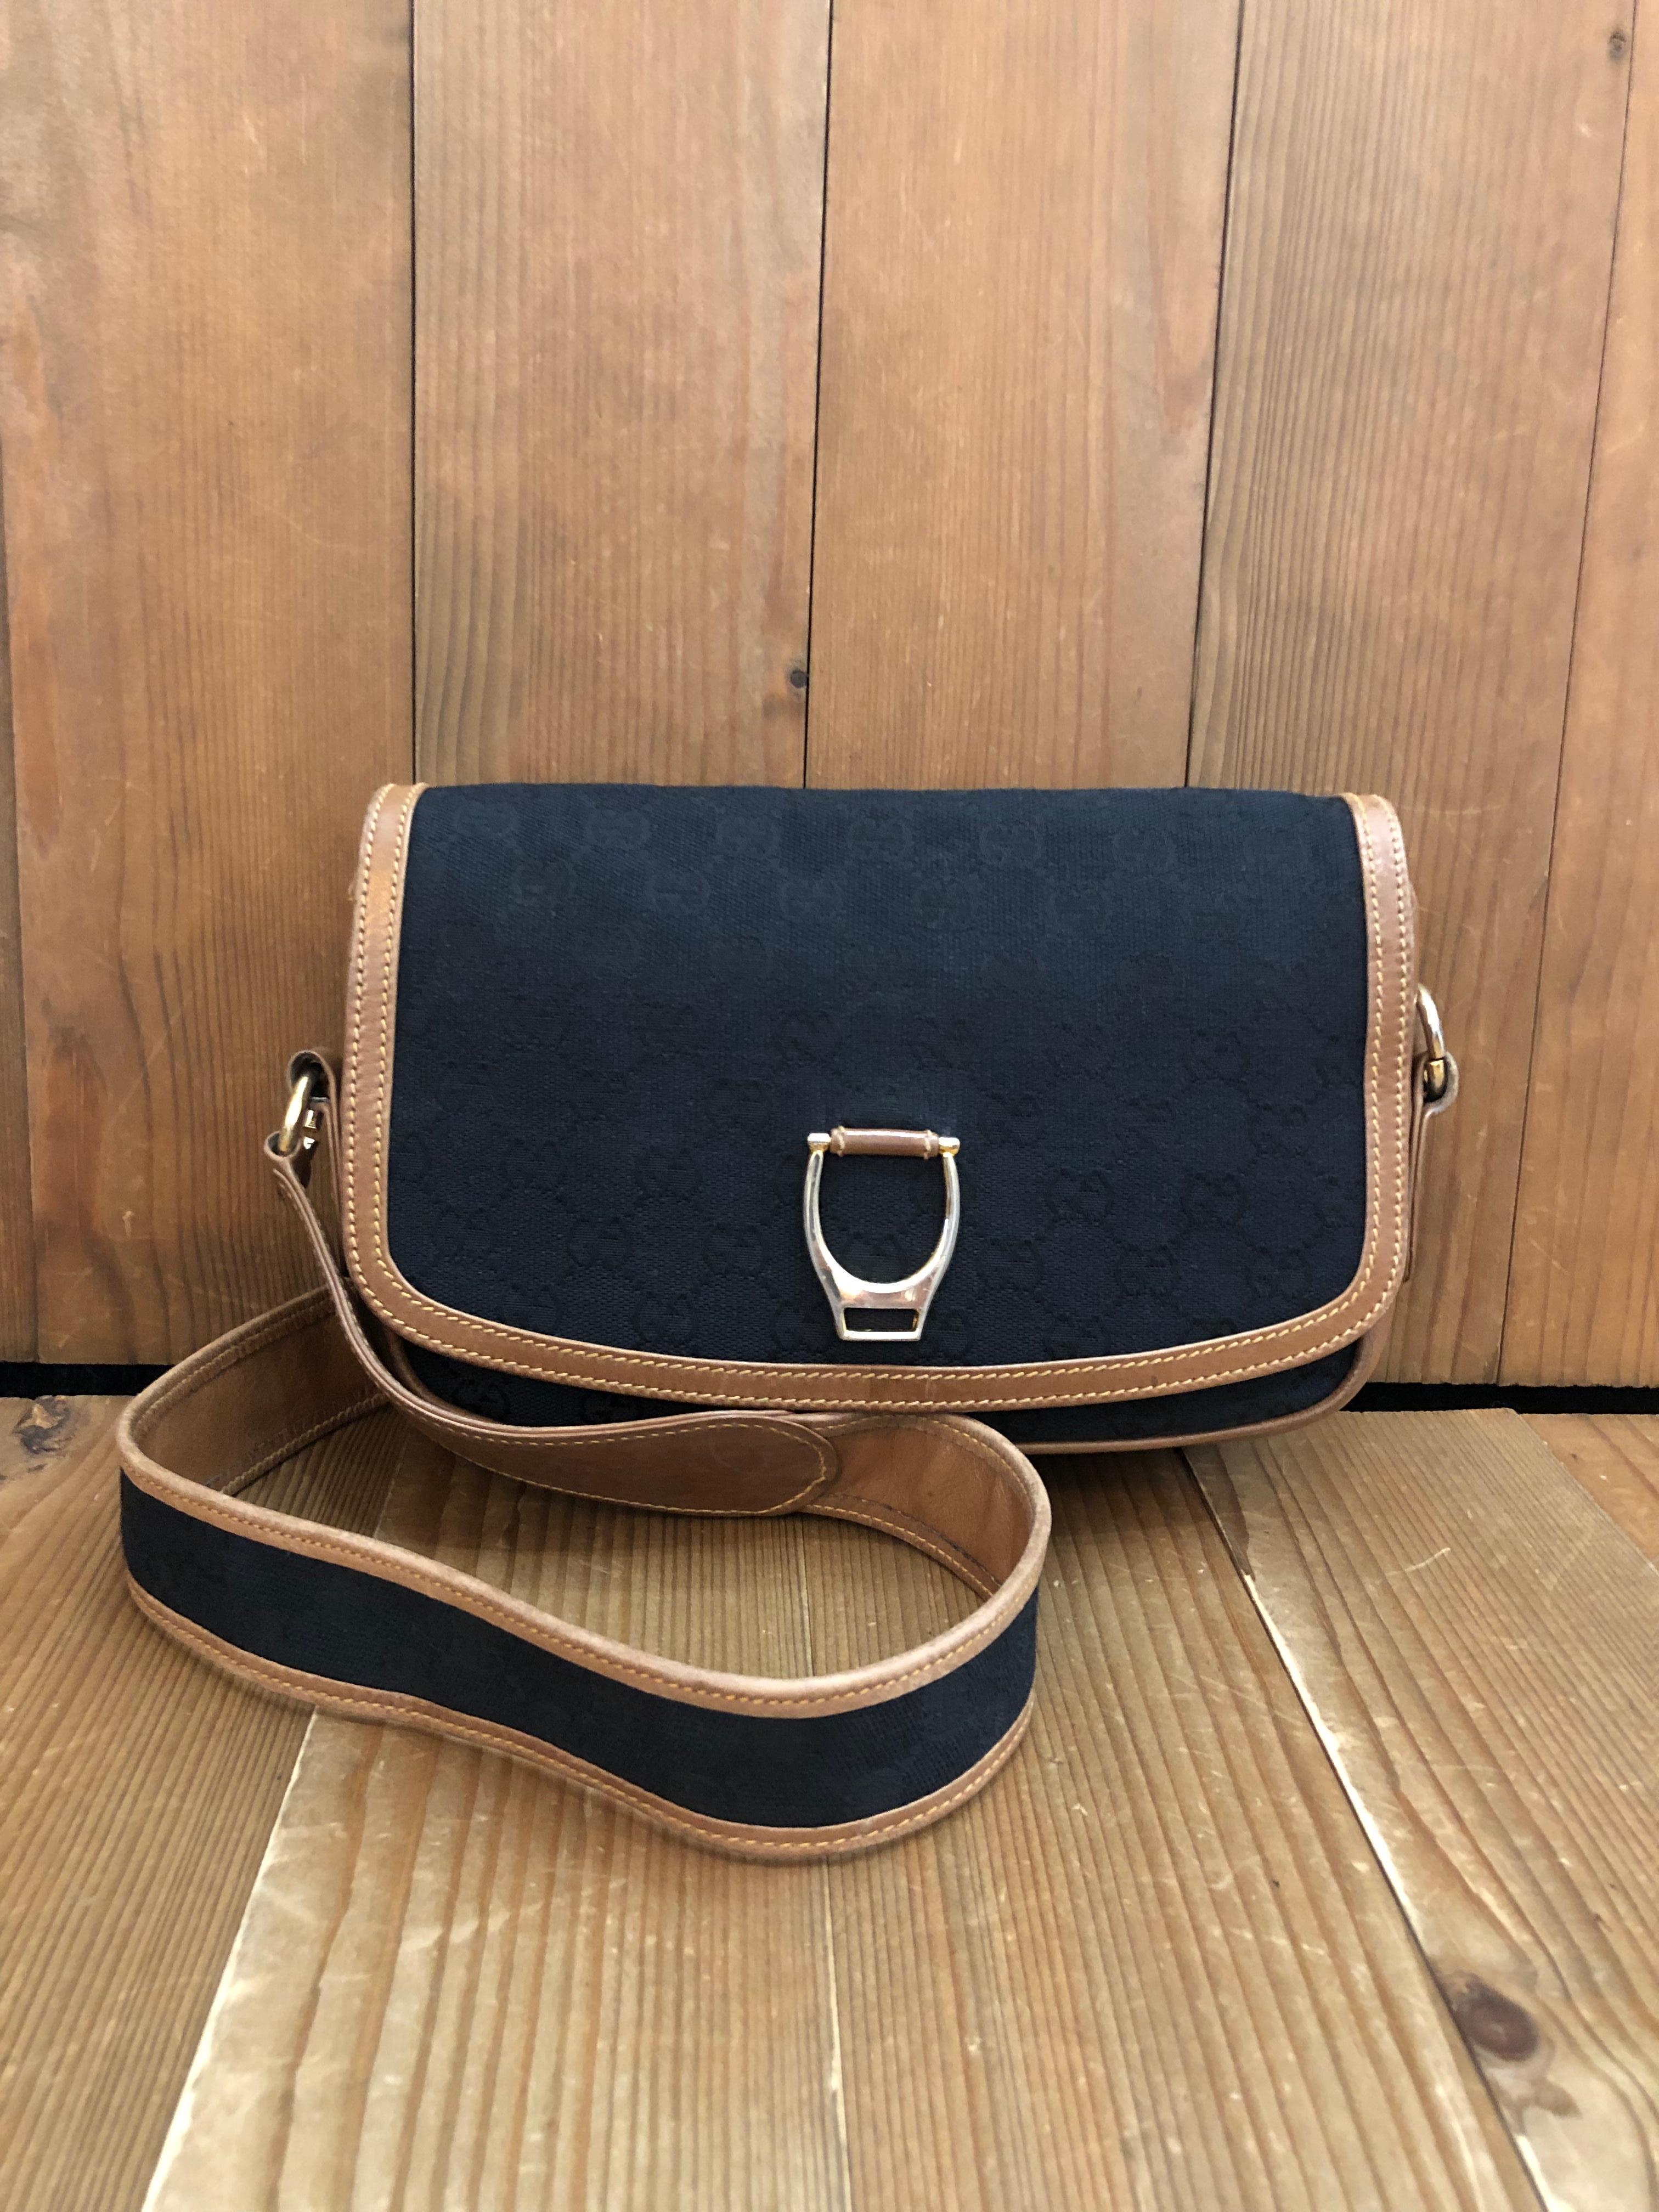 This Vintage GUCCI Boutique shoulder bag is crafted of GG jacquard in black trimmed with brown smooth leather. Front flap snap closure opens to a black leather interior featuring a patch pocket and a zippered pocket. Made in Italy. Measures